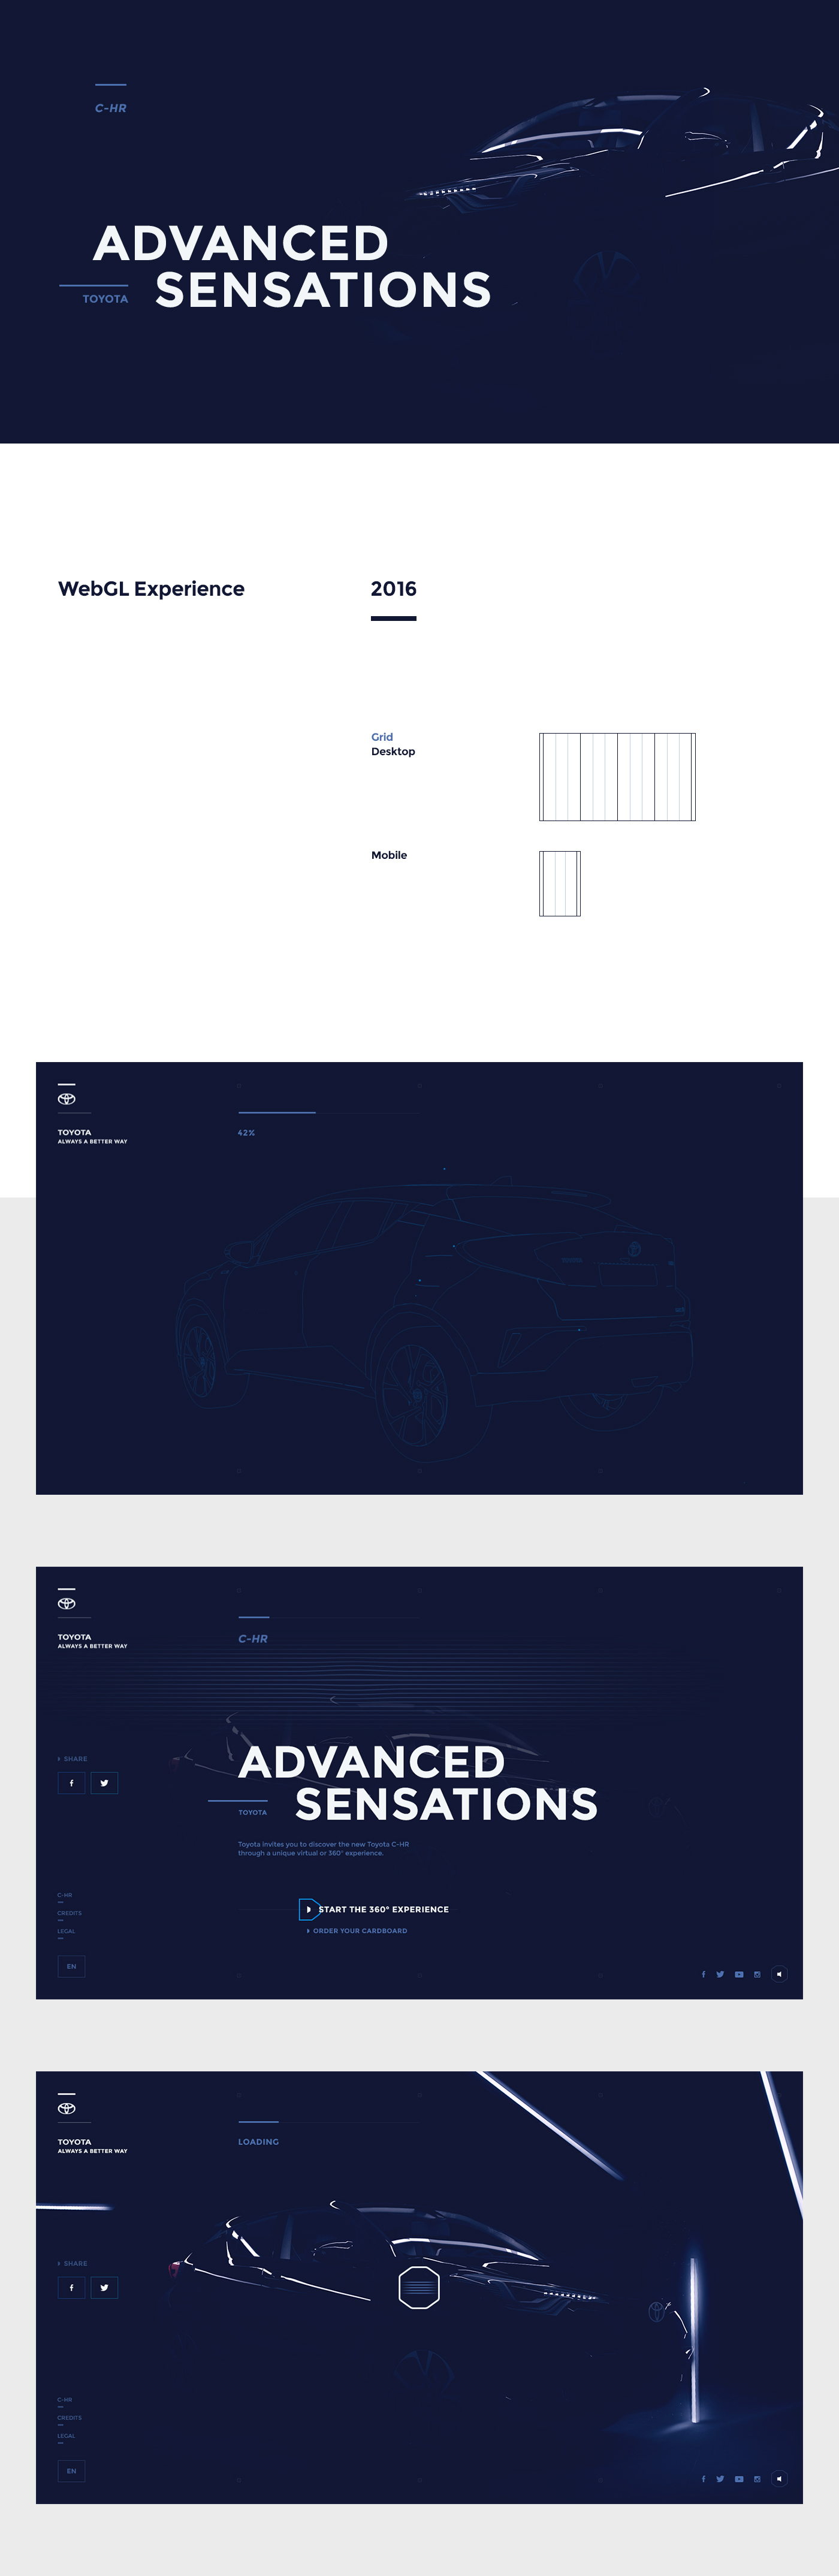 automobile toyota car Experience Innovative webgl interaction Layout type